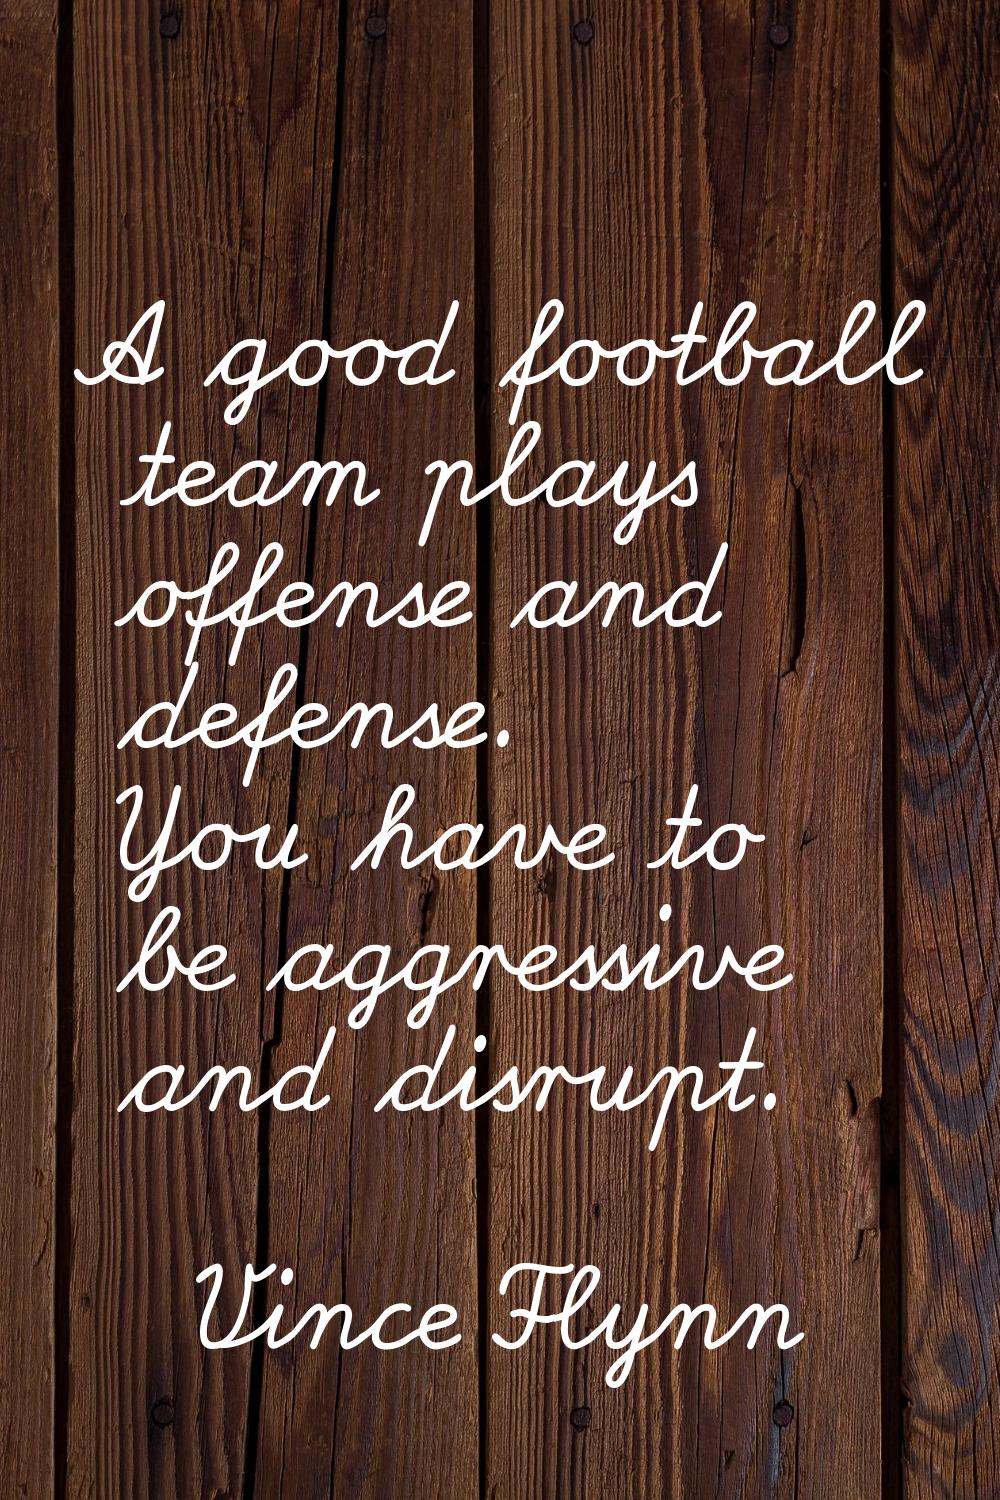 A good football team plays offense and defense. You have to be aggressive and disrupt.